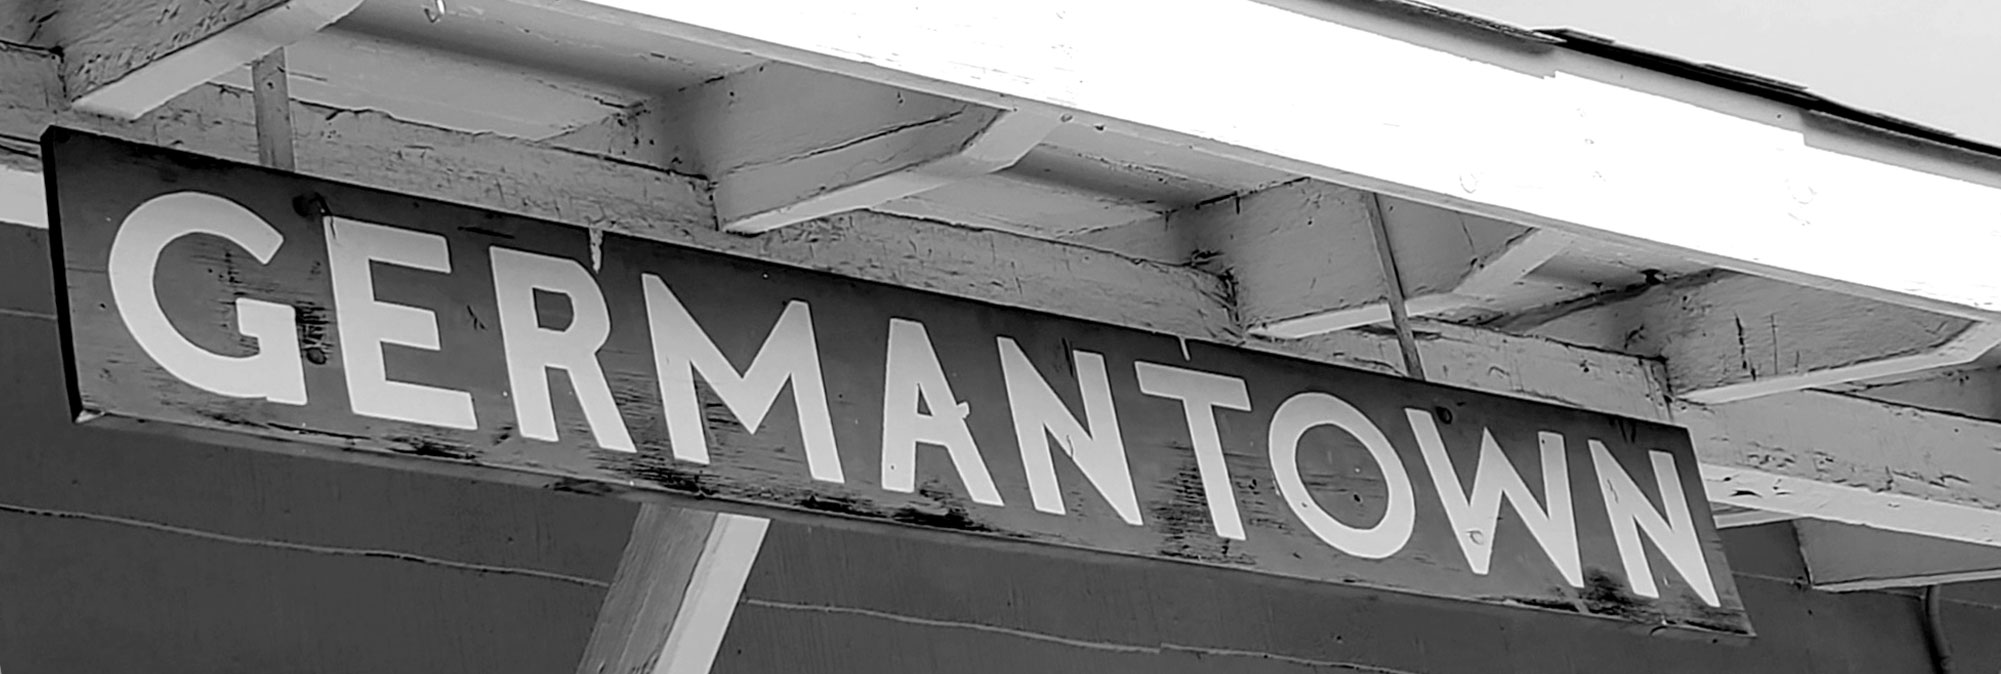 Germantown Sign located at the Depot